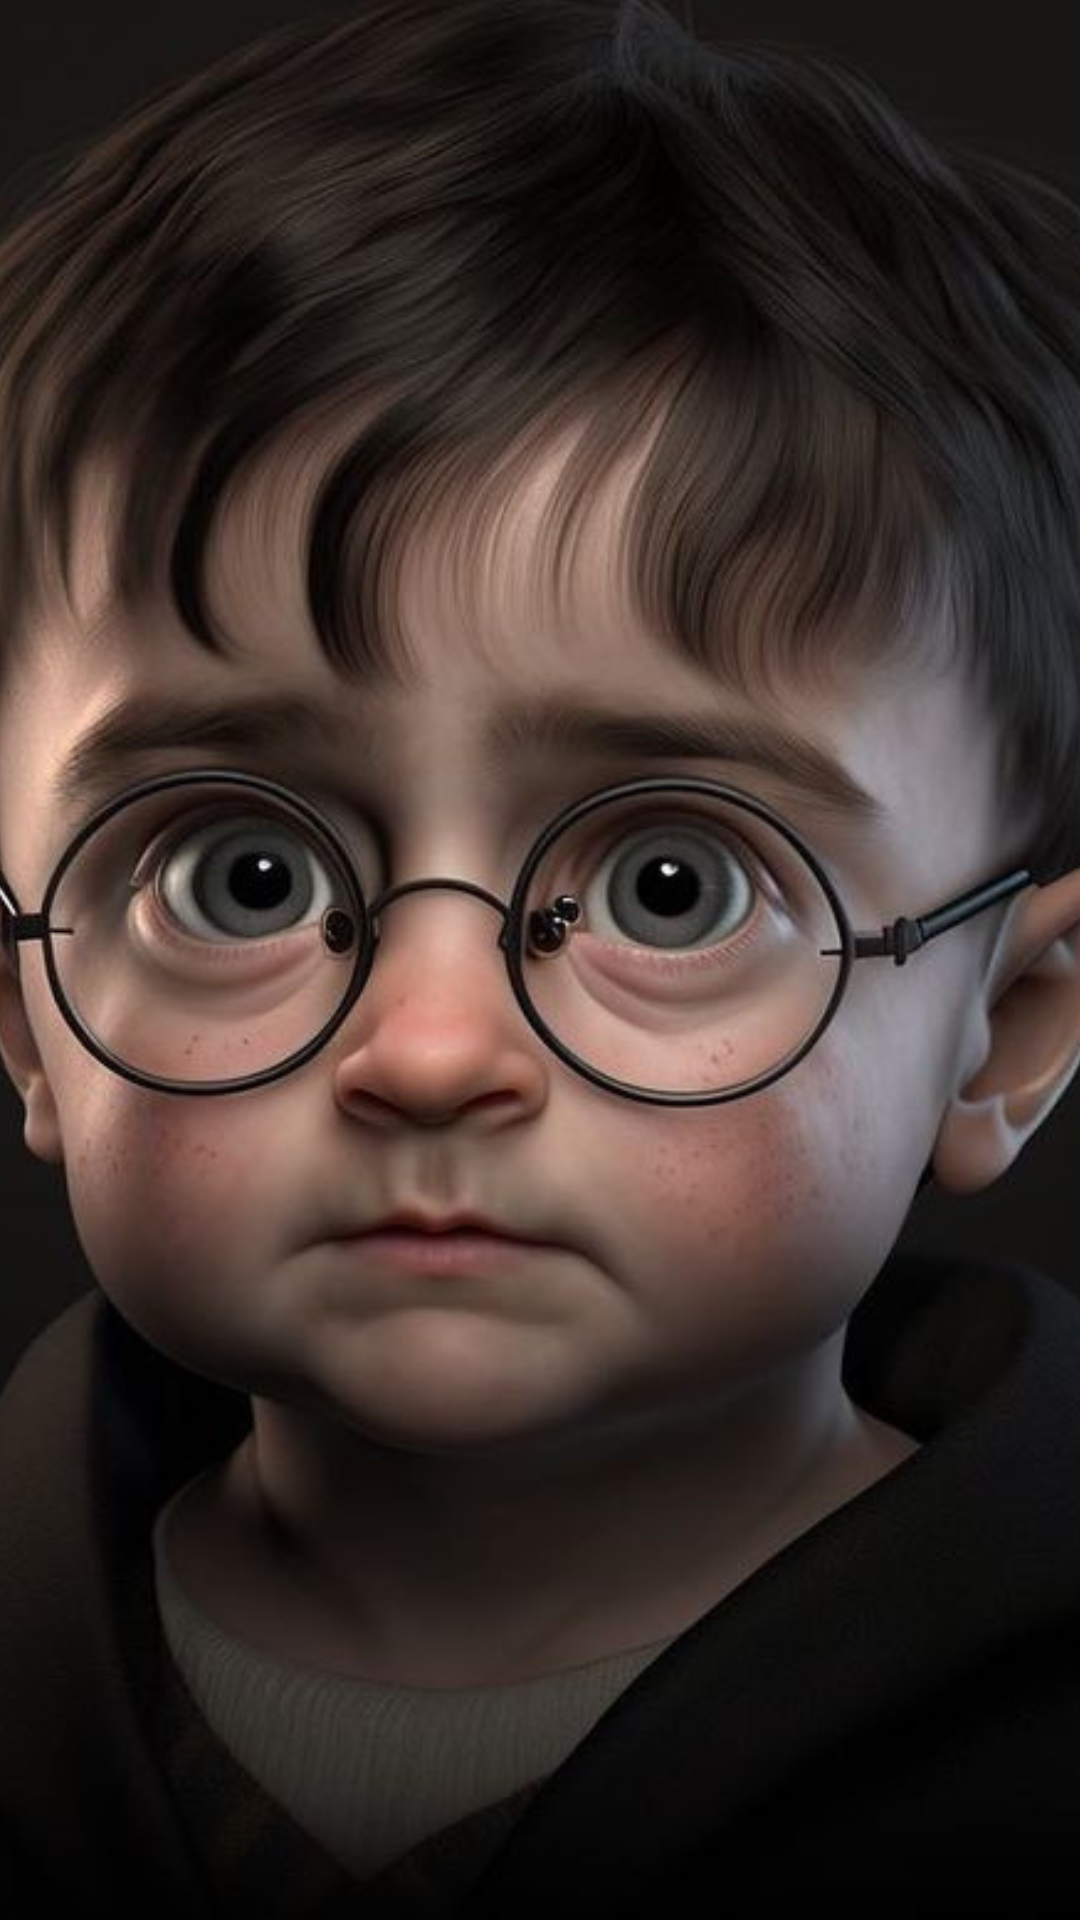 This baby dressed as Harry Potter is the cutest thing you'll see today